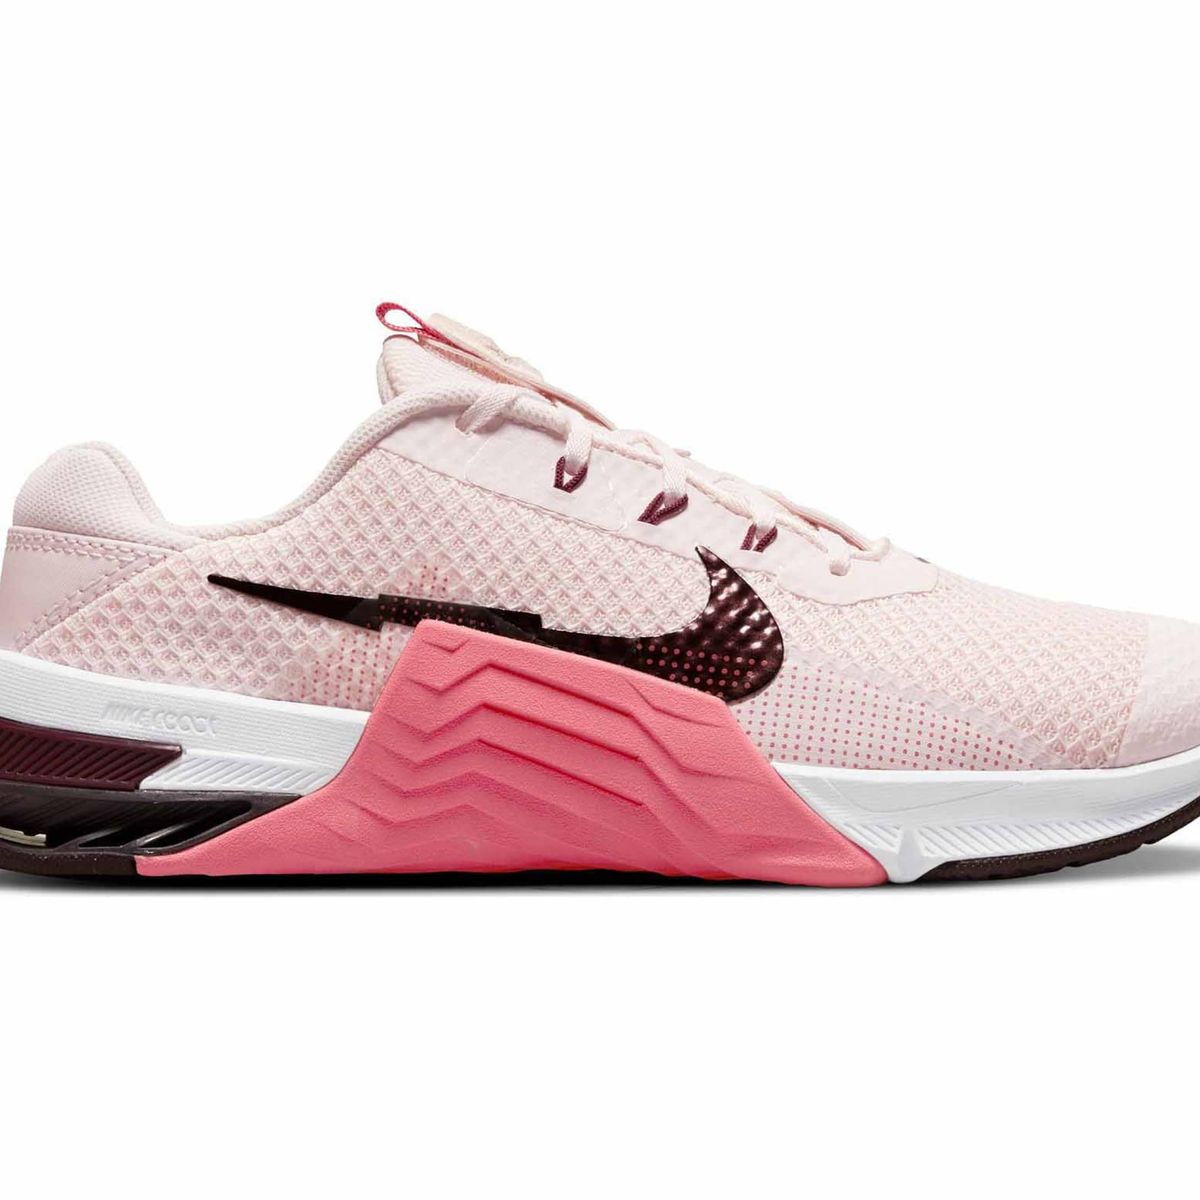 13 Best nike metcon sneakers Workout Shoes for Women 2022 | The Strategist